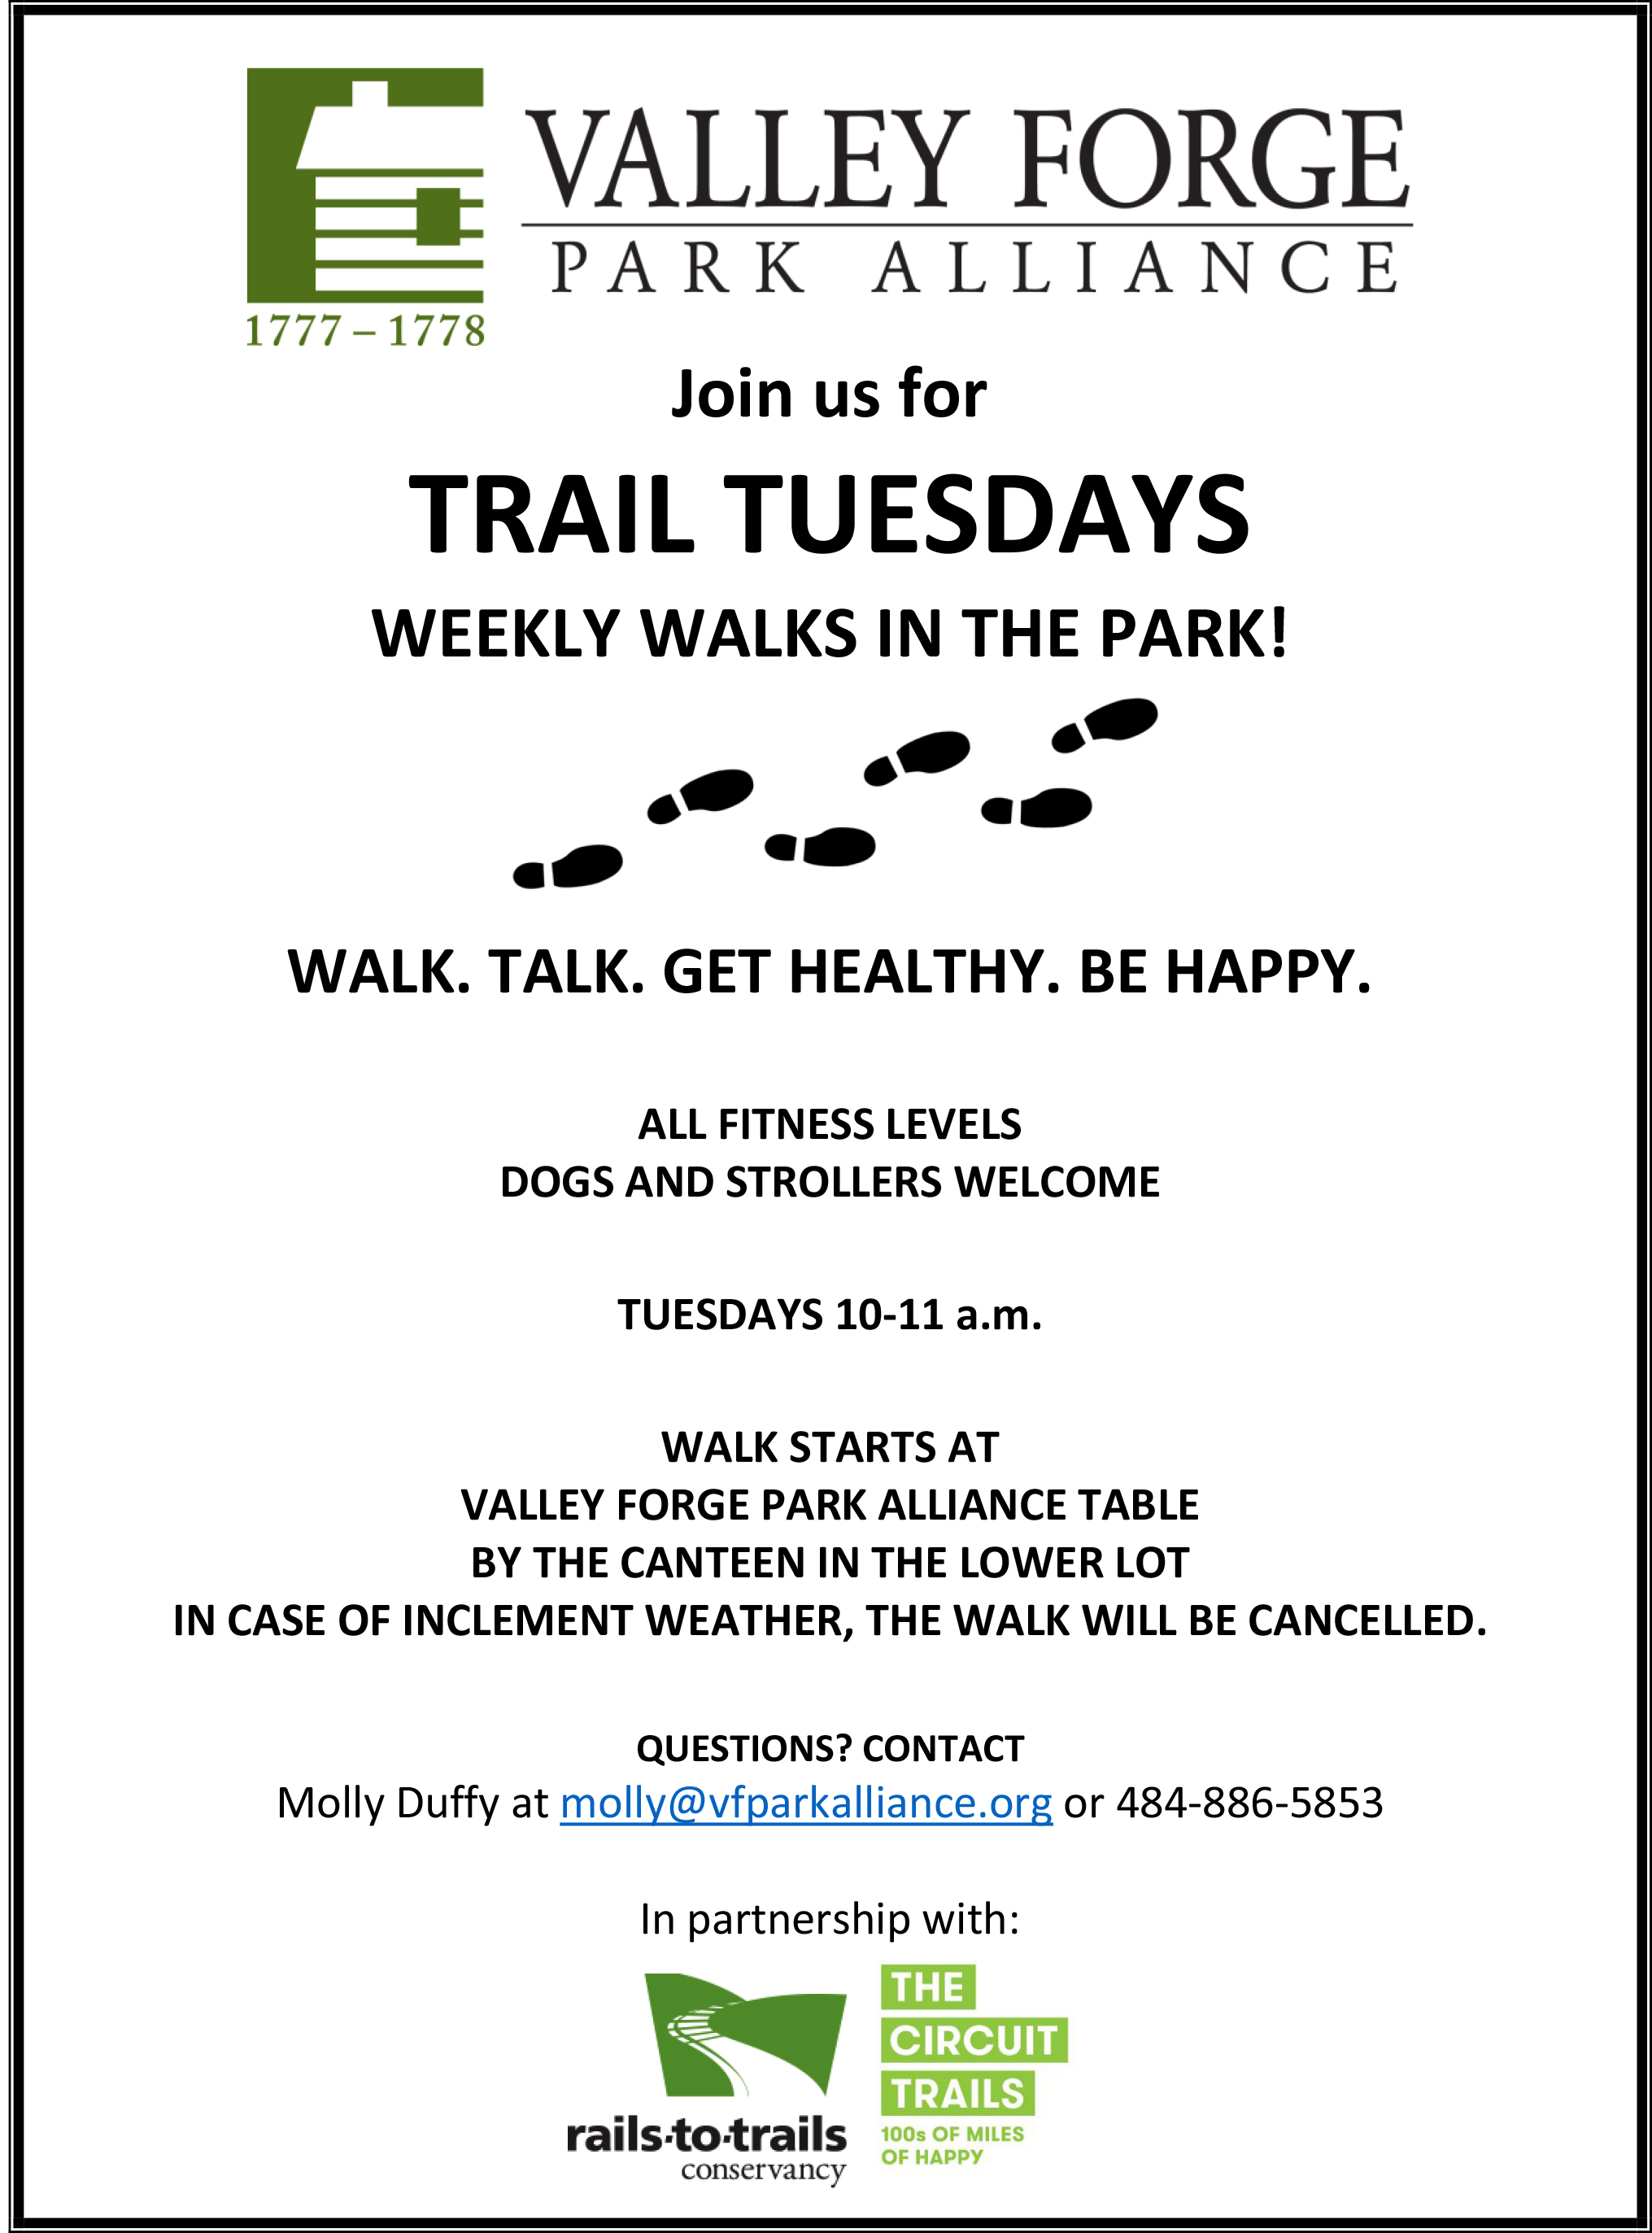 Flyer for Valley Forge Park Alliance Tuesday walks.